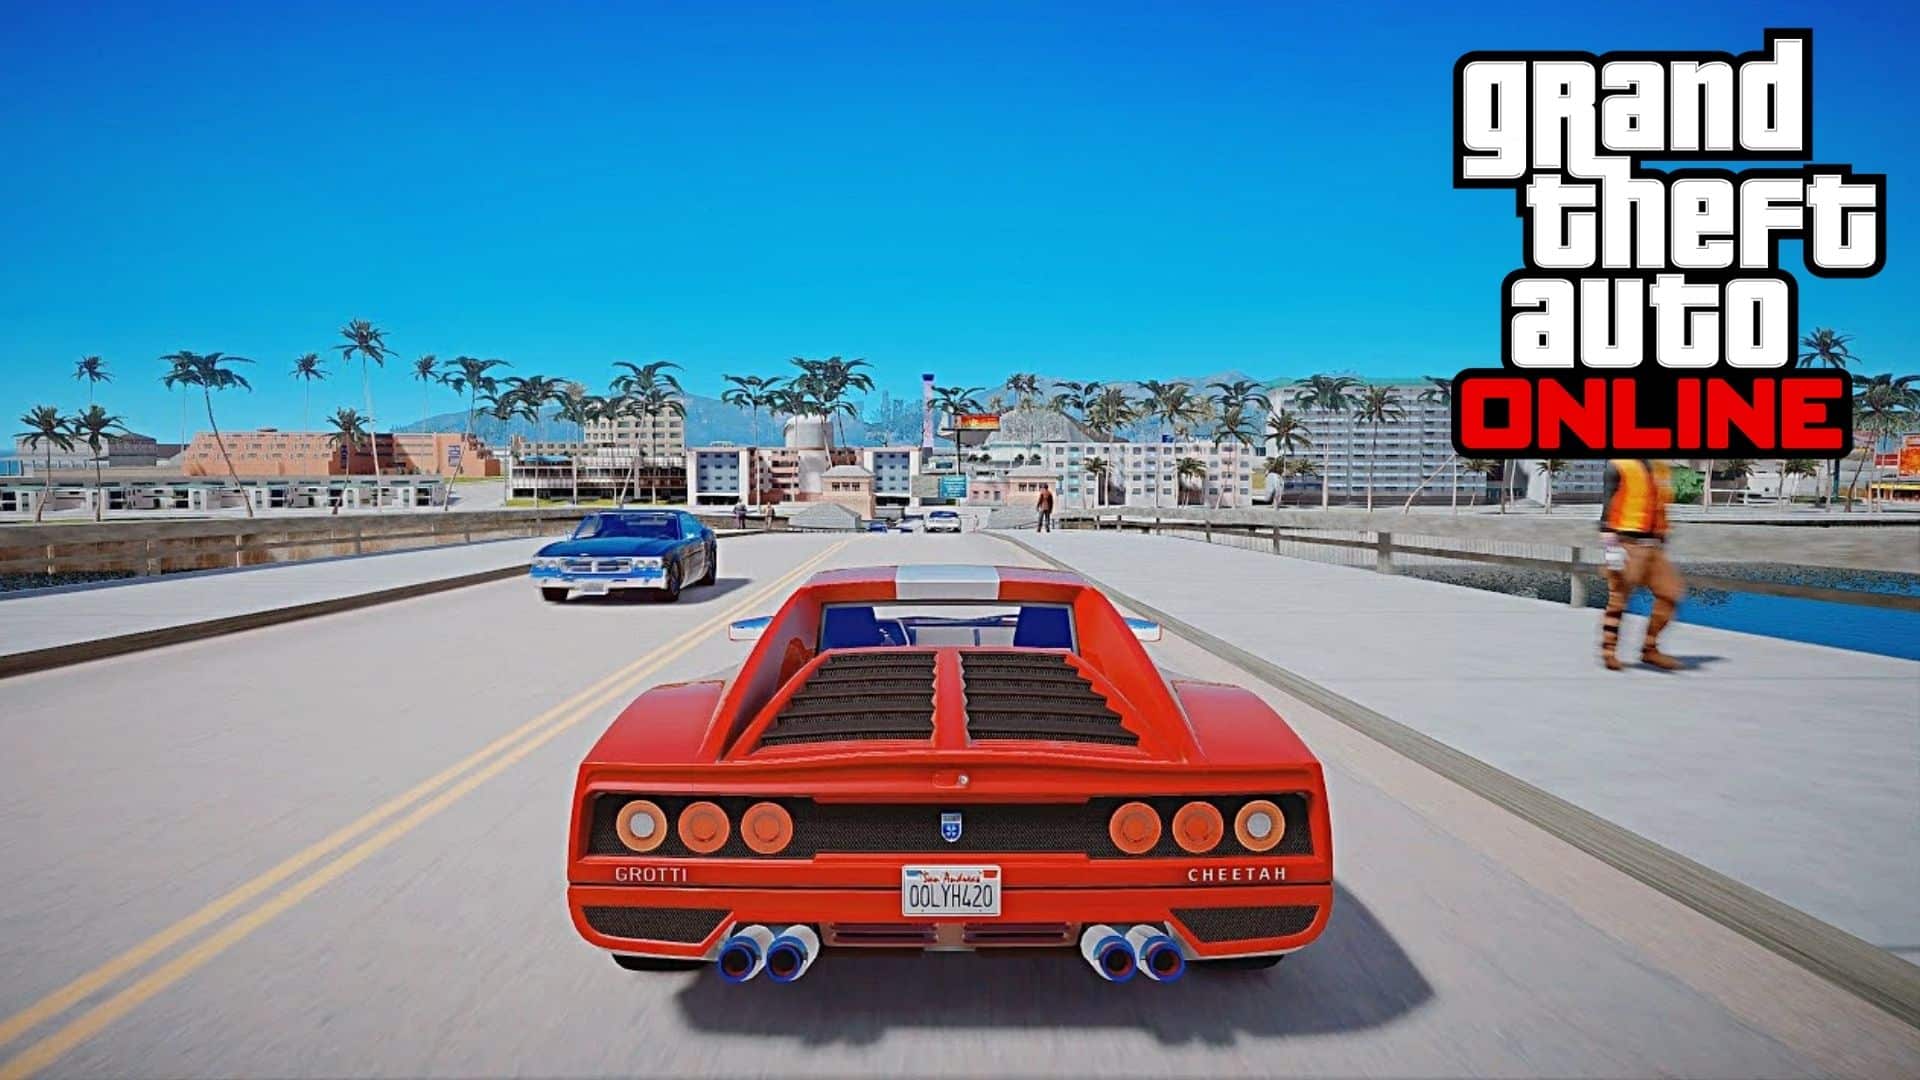 GTA online mod of Vice City with updated graphics